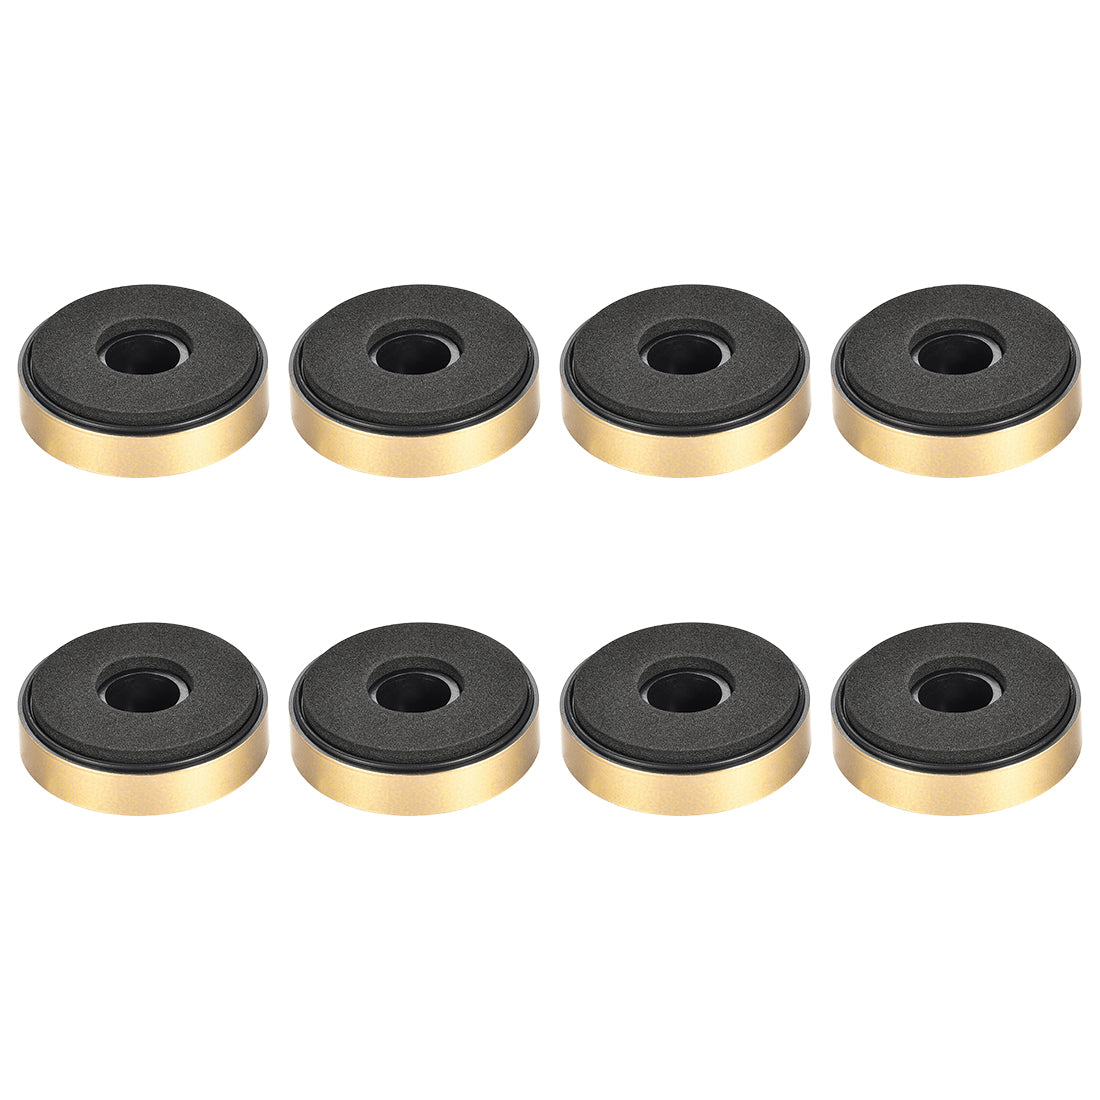 uxcell Uxcell 8 Pcs D40xH11.35mm Plastic Feet Anti-Vibration Base Pad Stand for Speaker Guitar Amplifier HiFi Gold Tone